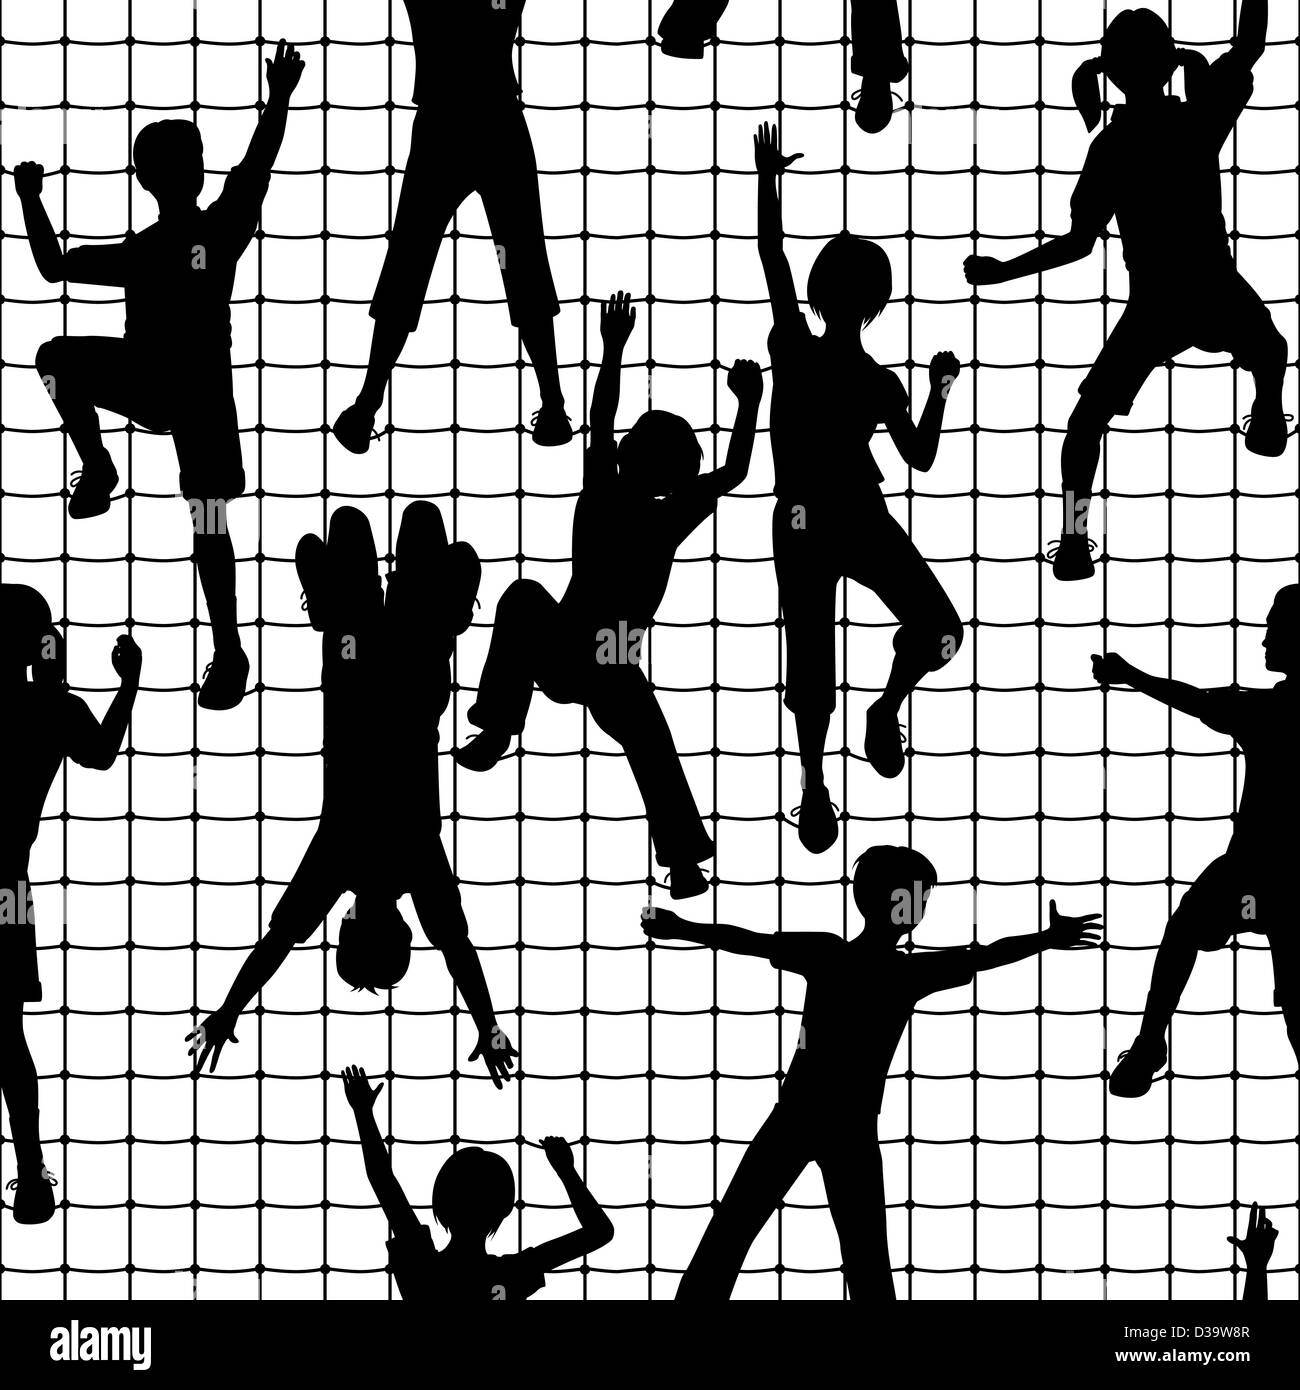 Seamless tile of children silhouettes climbing a rope mesh Stock Photo